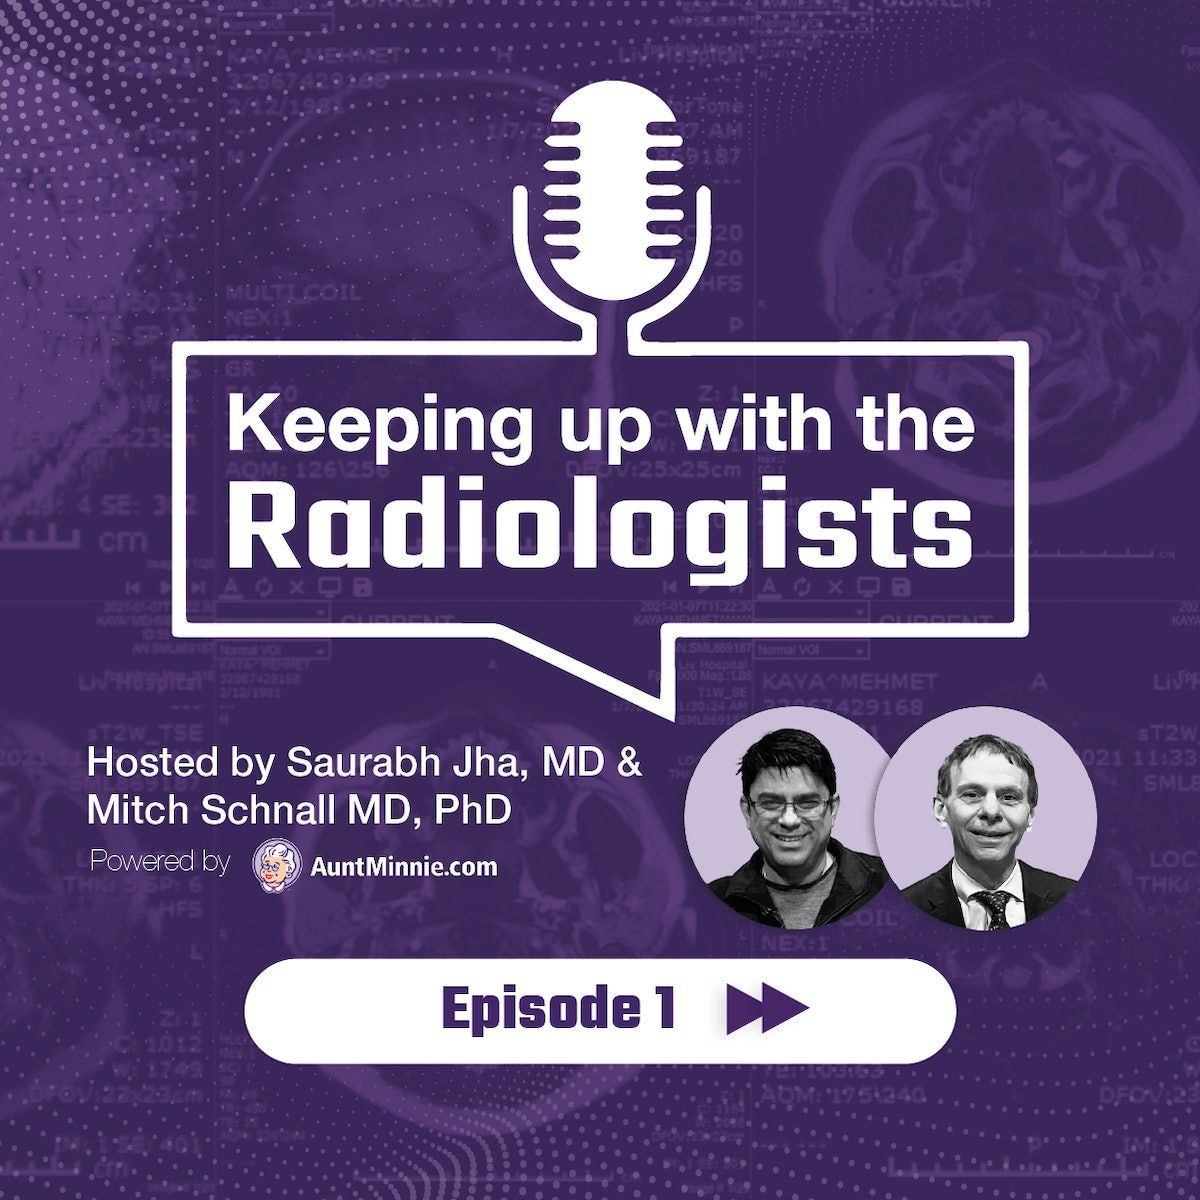 In the first episode of their Keeping up with the Radiologists podcast series, @RogueRad and @MitchSchnall of @PennRadiology discuss why #radiology is still a good choice for medical students. bit.ly/3TzaPeY